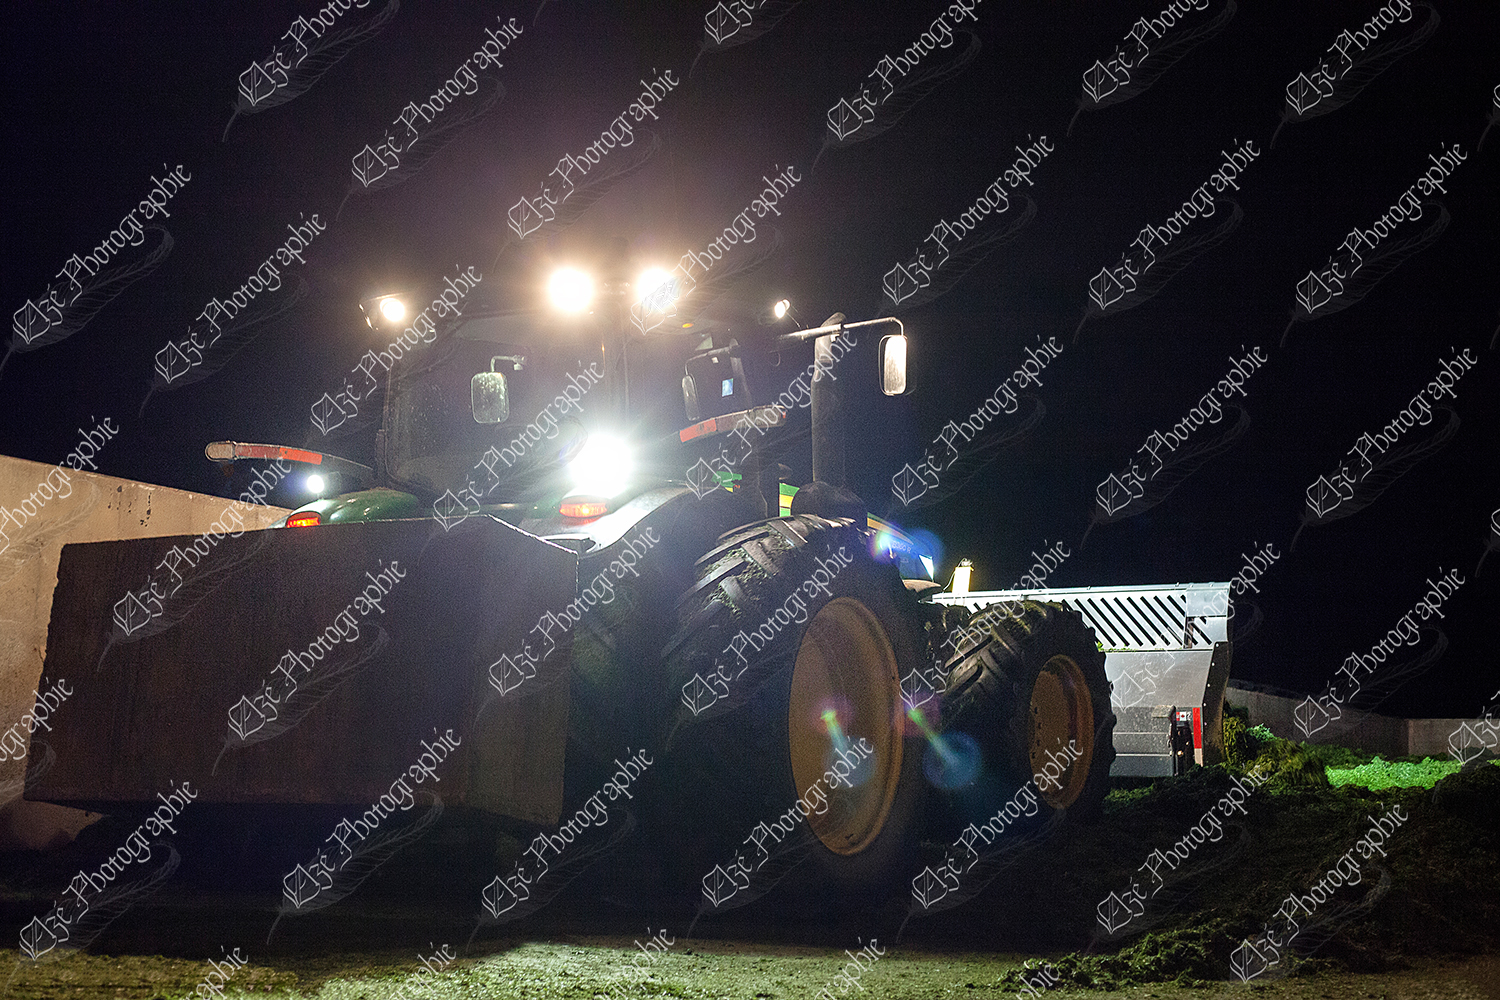 elze_photo_9715_compaction_ensilage_recolte_summer_night_tractor